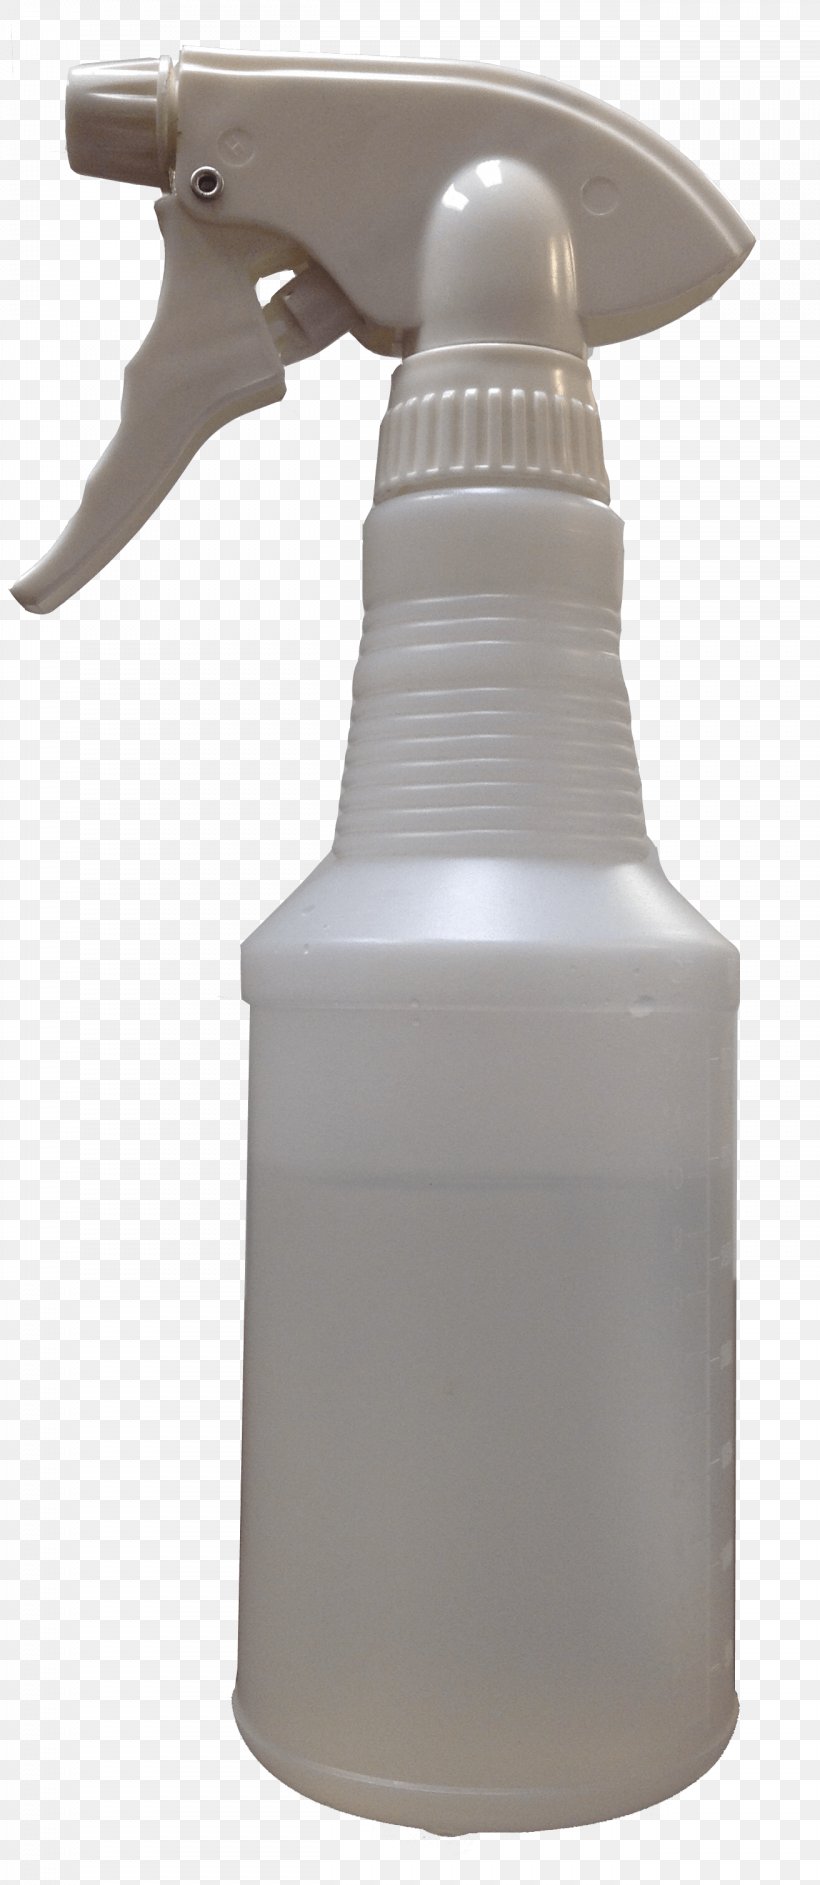 Spray Bottle Cleaning Aerosol Spray, PNG, 1312x3016px, Spray, Aerosol Spray, Bottle, Chemical Industry, Cleaning Download Free